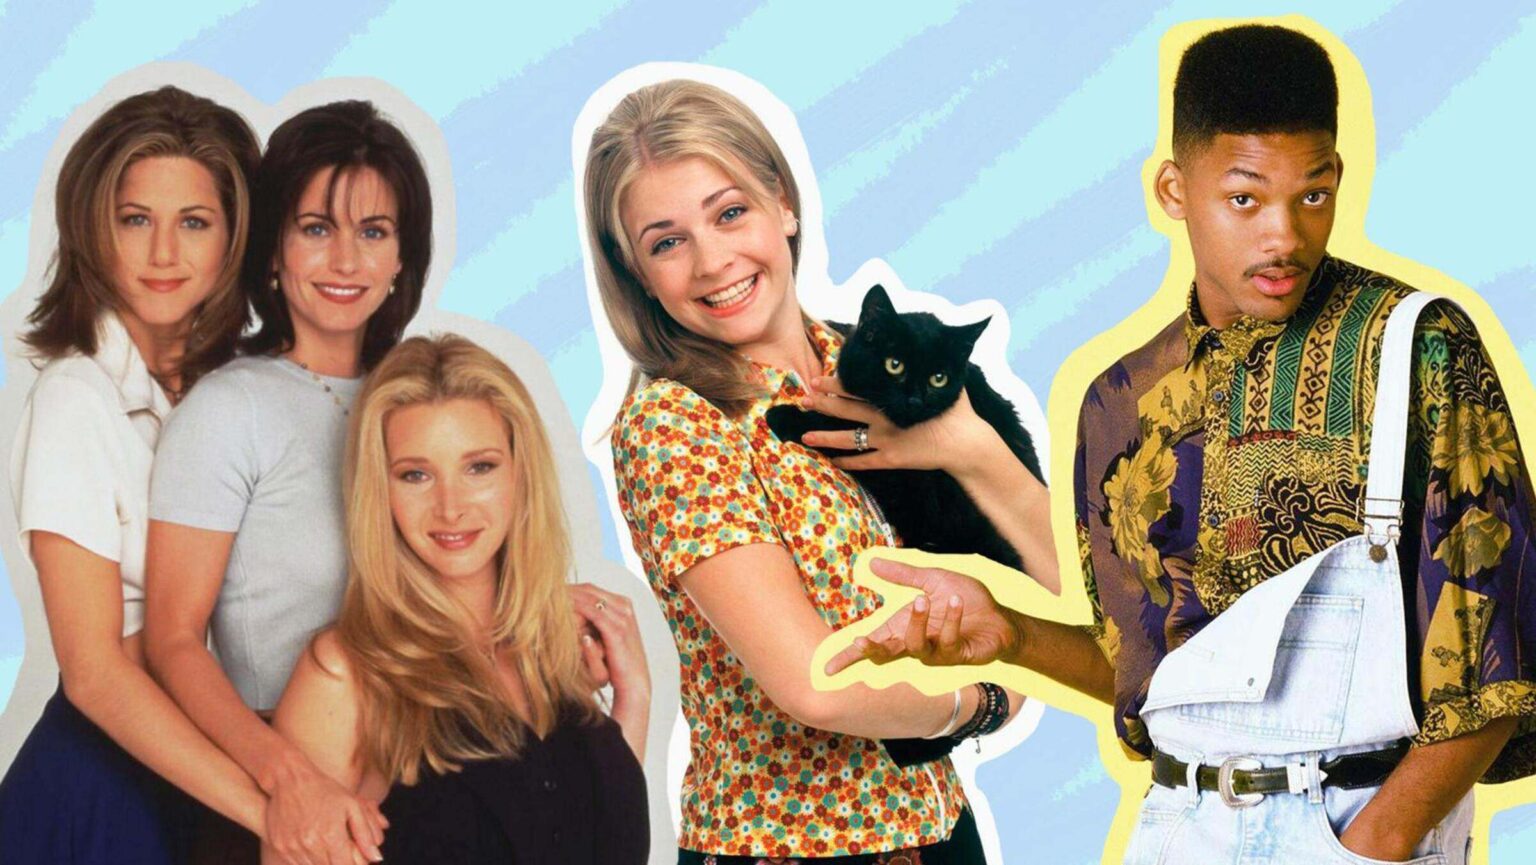 The 90s were truly an era for some really top notch sitcoms. Stroll down memory lane to revisit the most iconic of the decade.